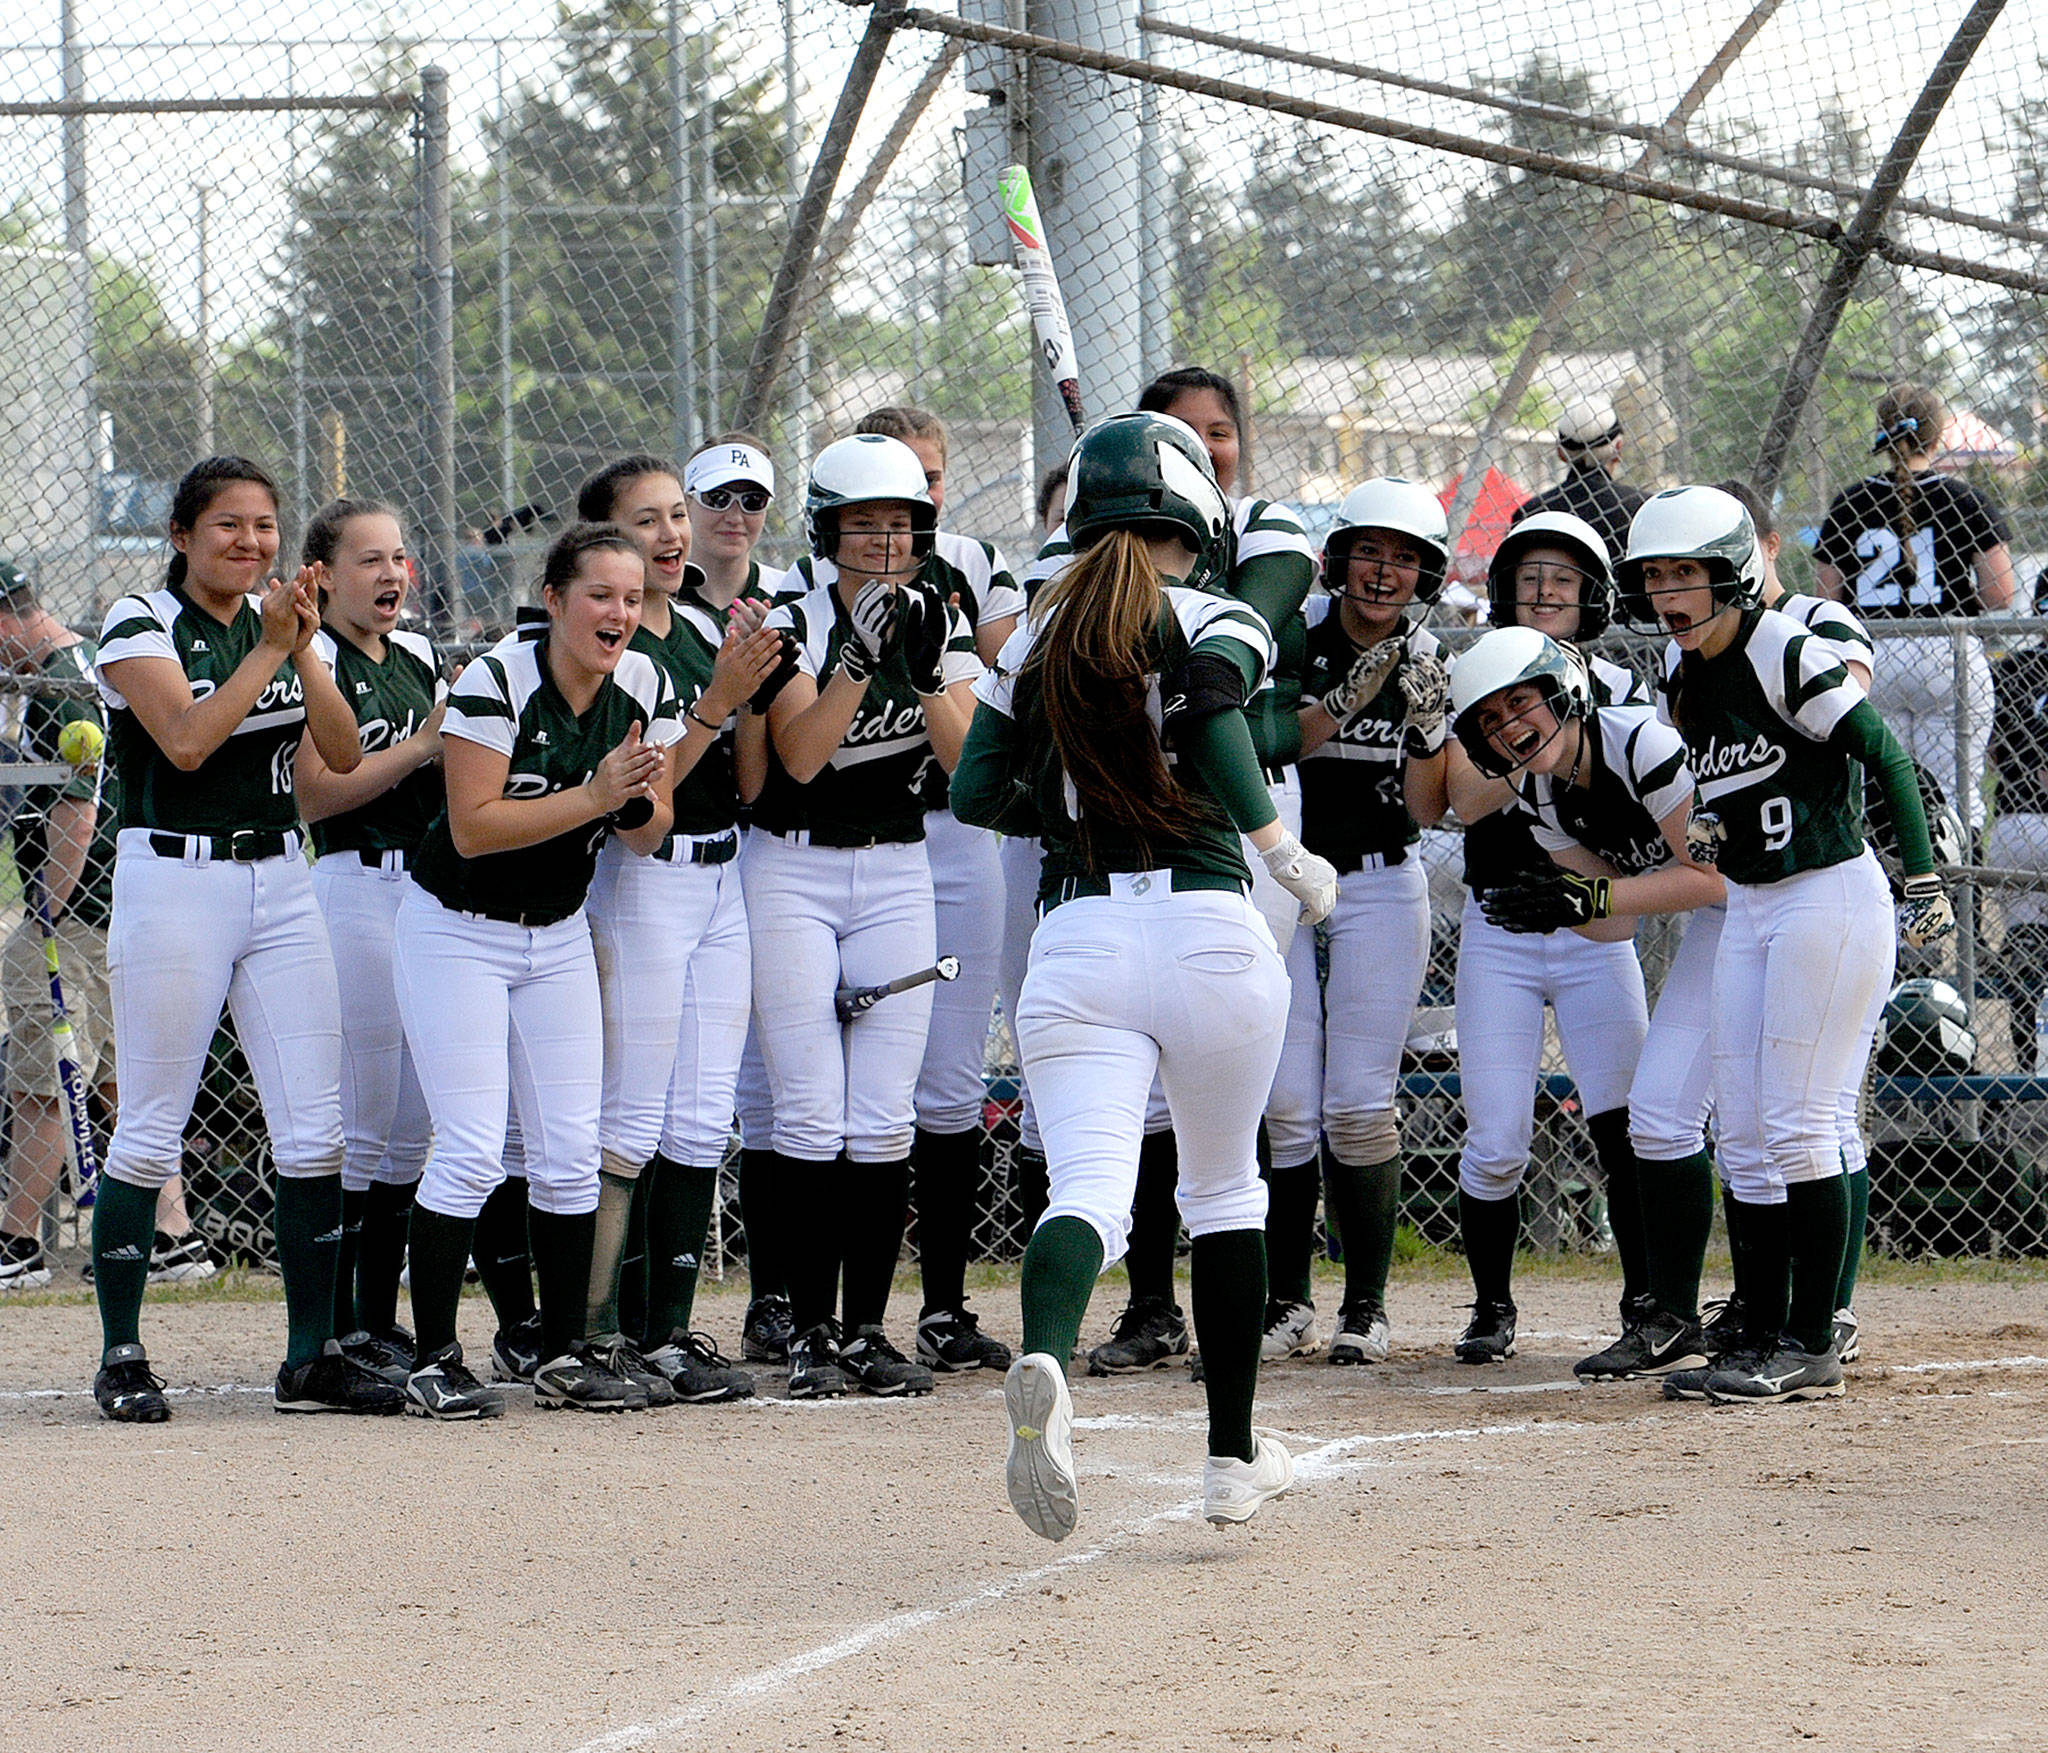 Lonnie Archibald/for Peninsula Daily News Port Angeles players mob Lauren Lunt at home plate after Lunt hit a grand slam in the first inning of the Roughriders’ 16-0 win Saturday over Orting. The victory sent the Riders to the West Central District 3 championship game.